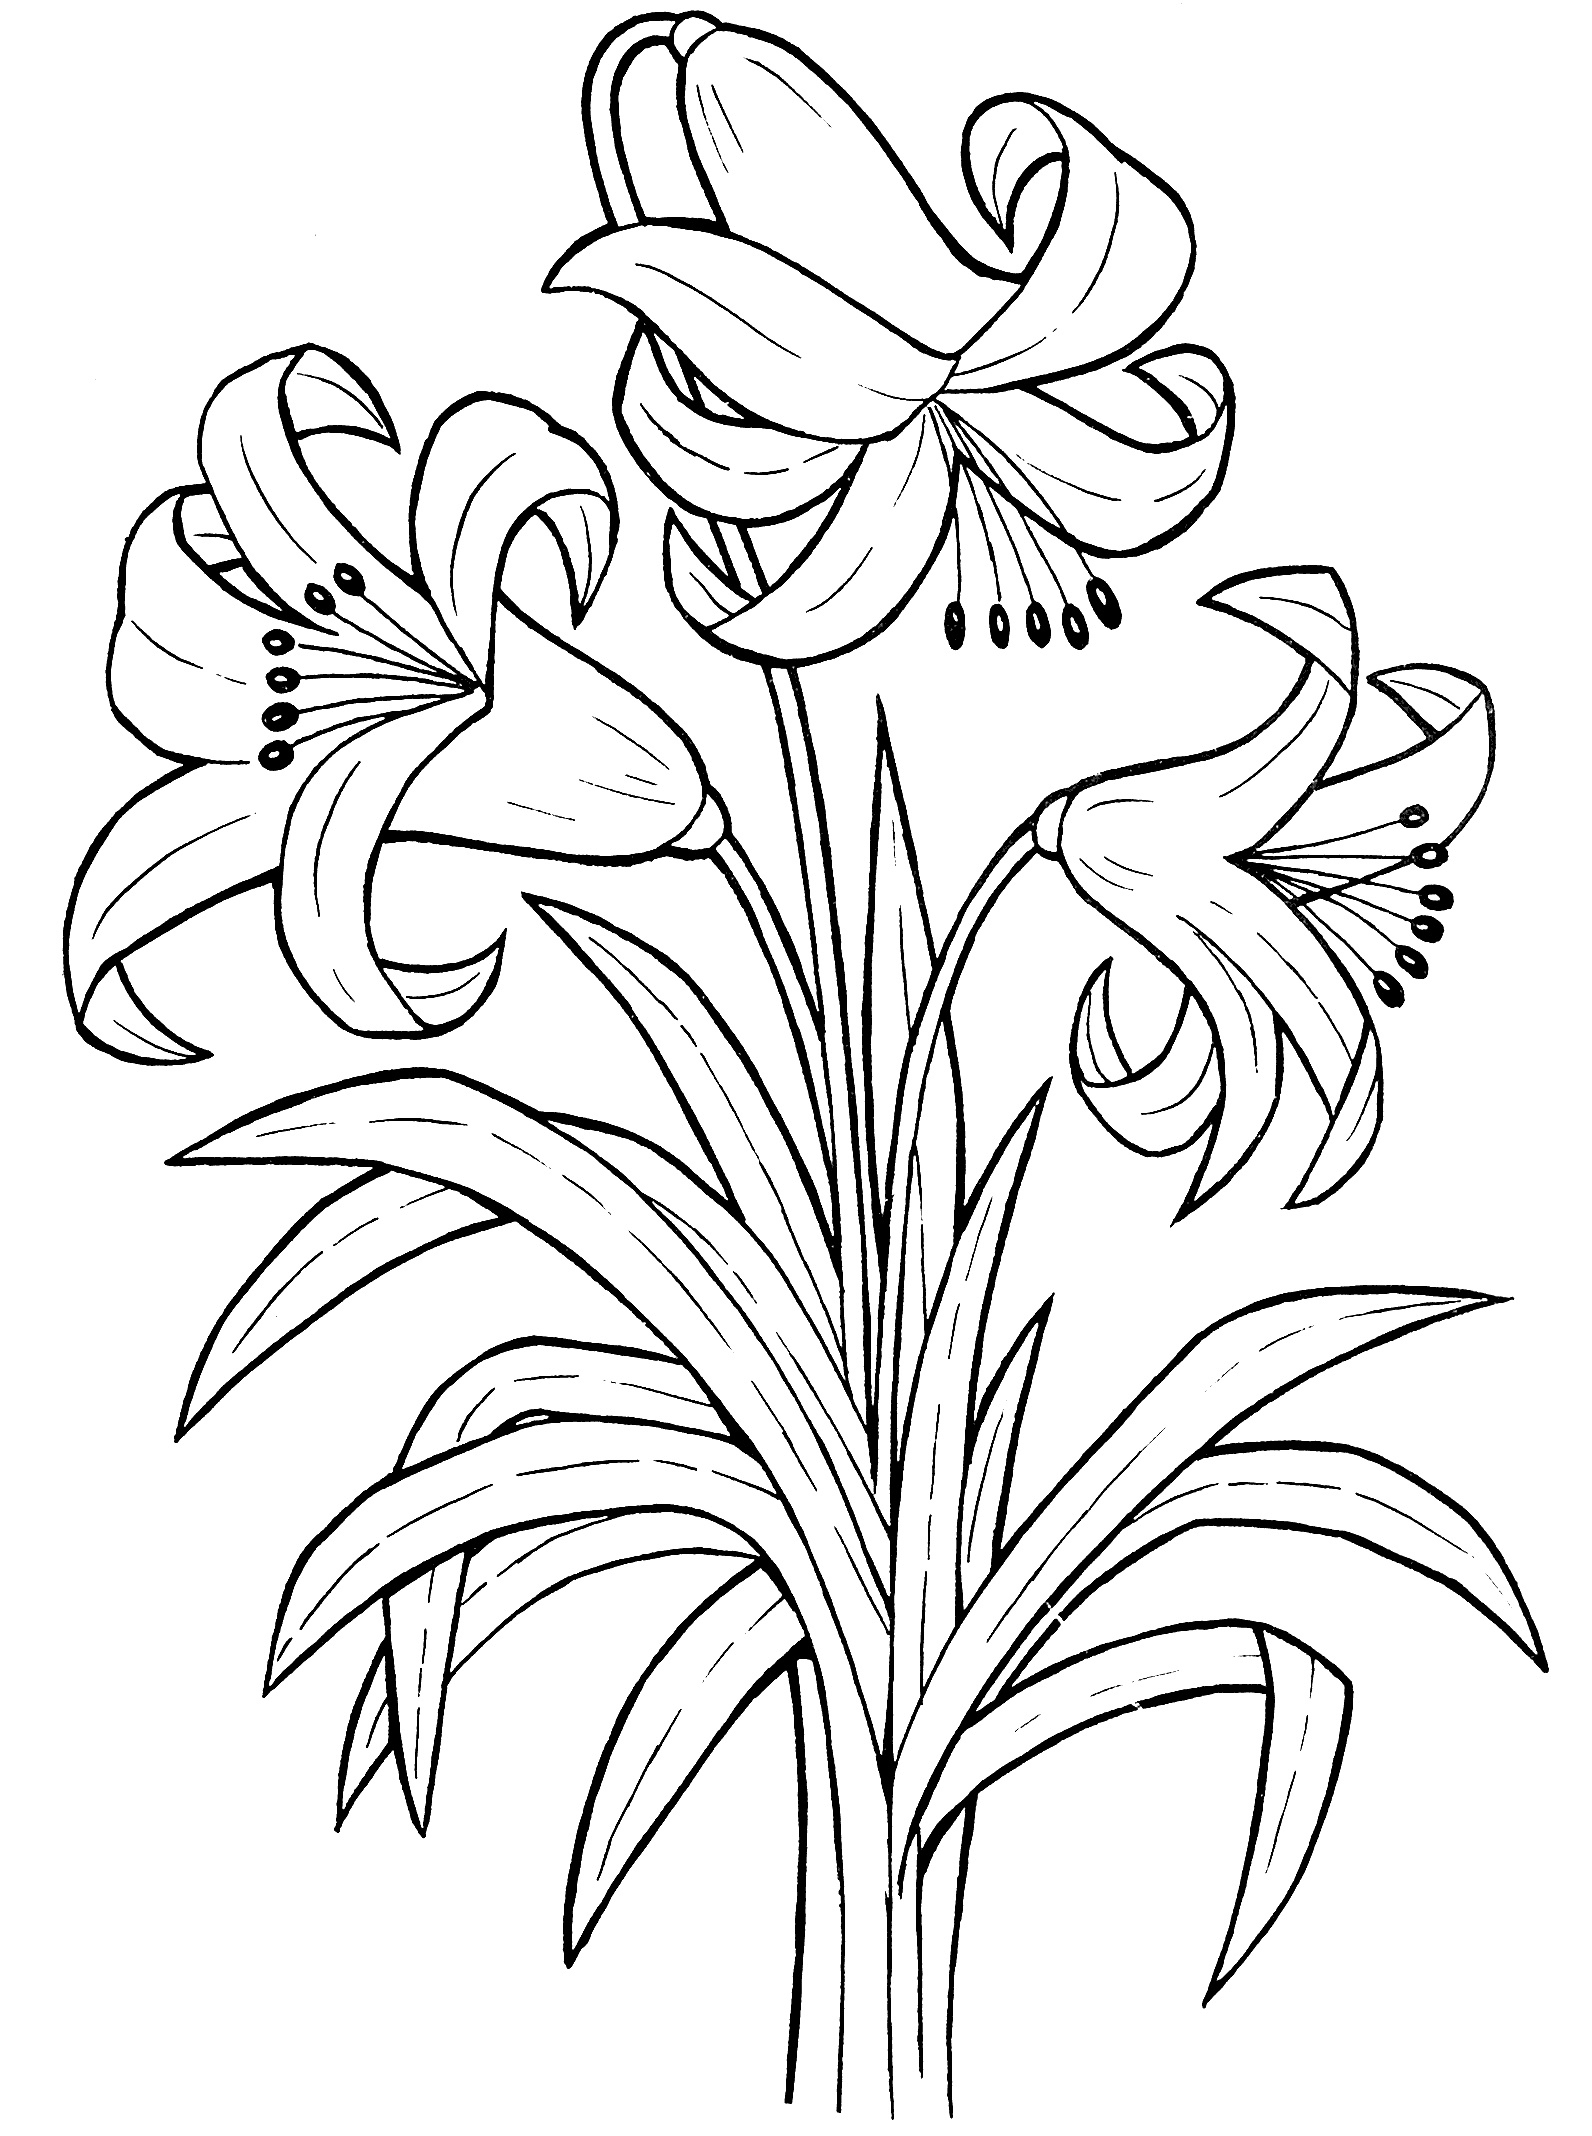 Coloring picture of beautiful lilies